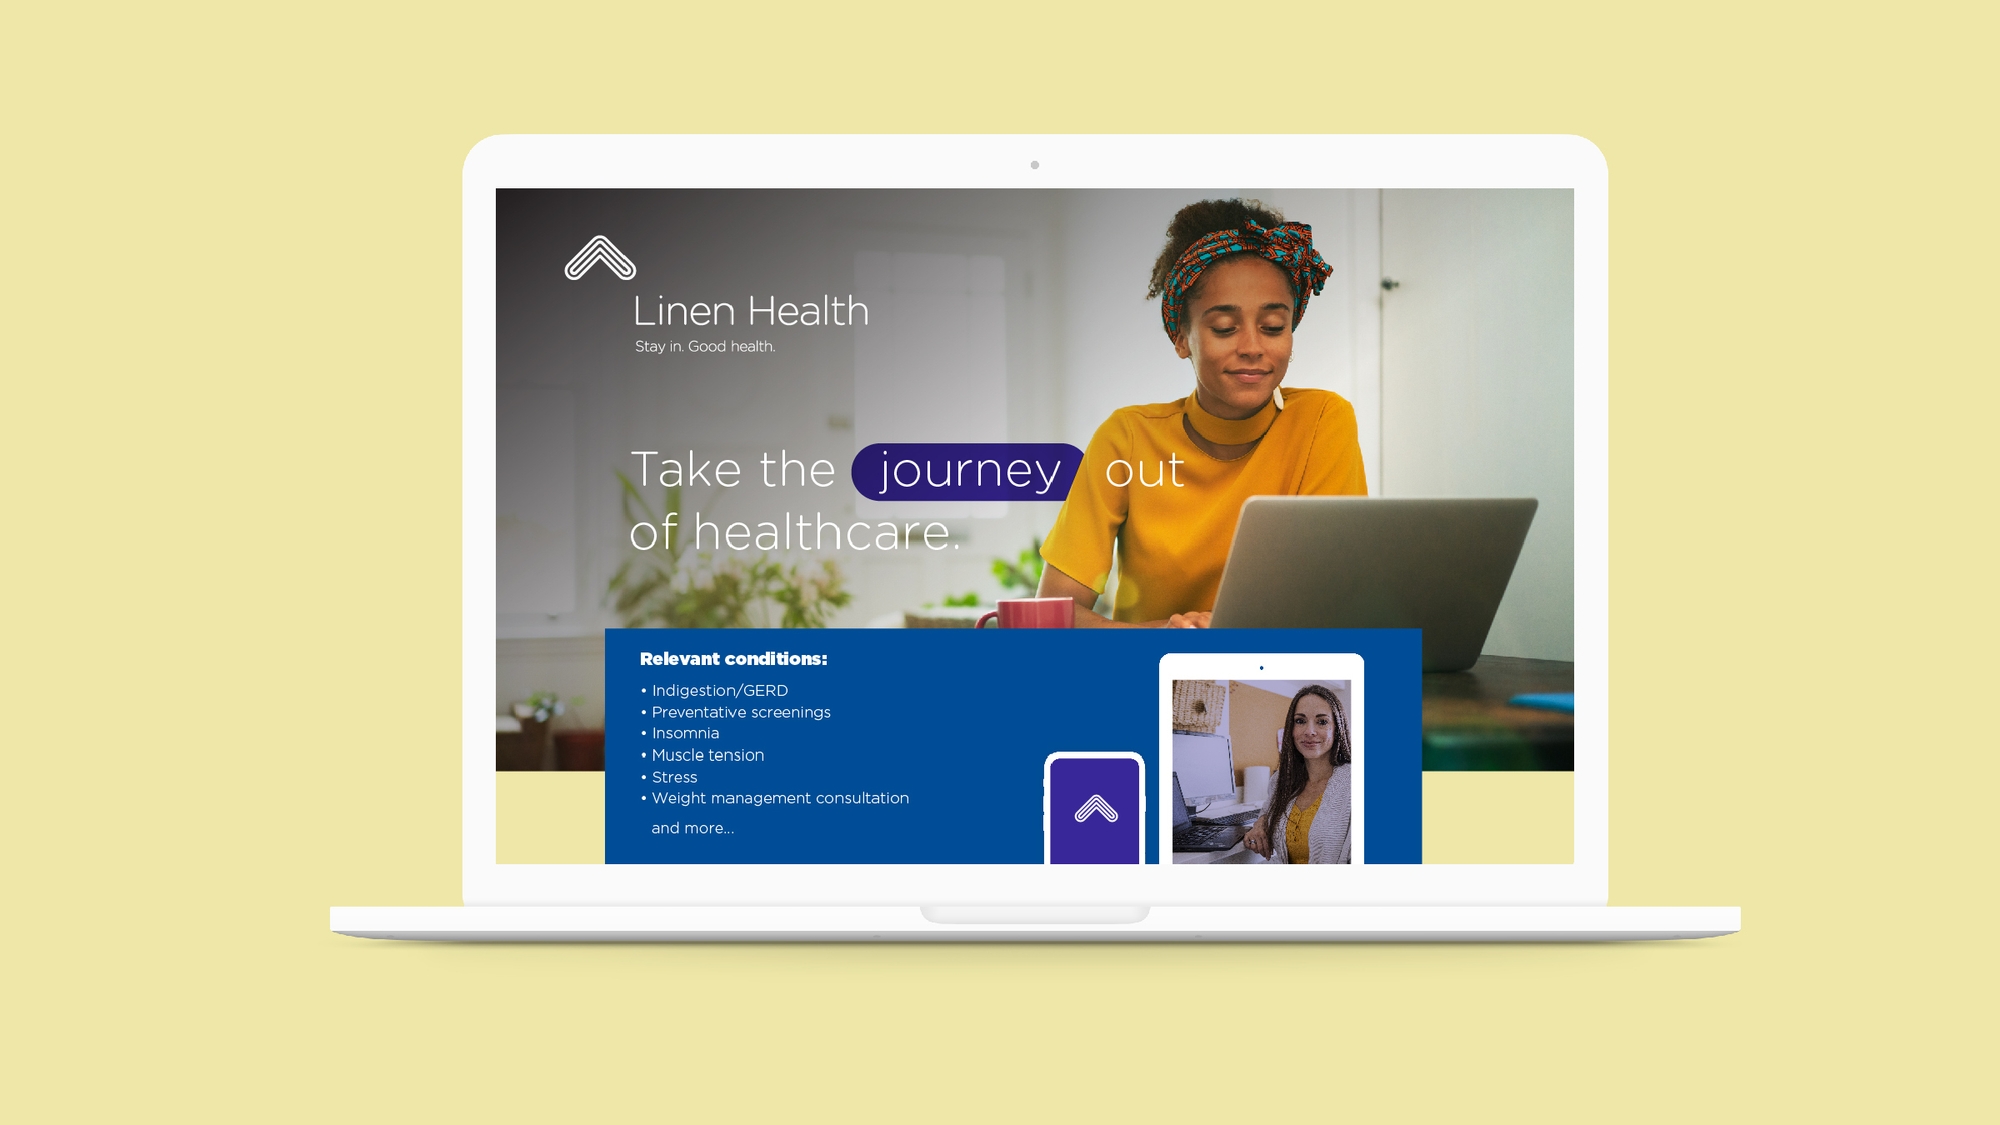 Linen Health - Take the journey out of healthcare desktop with web image